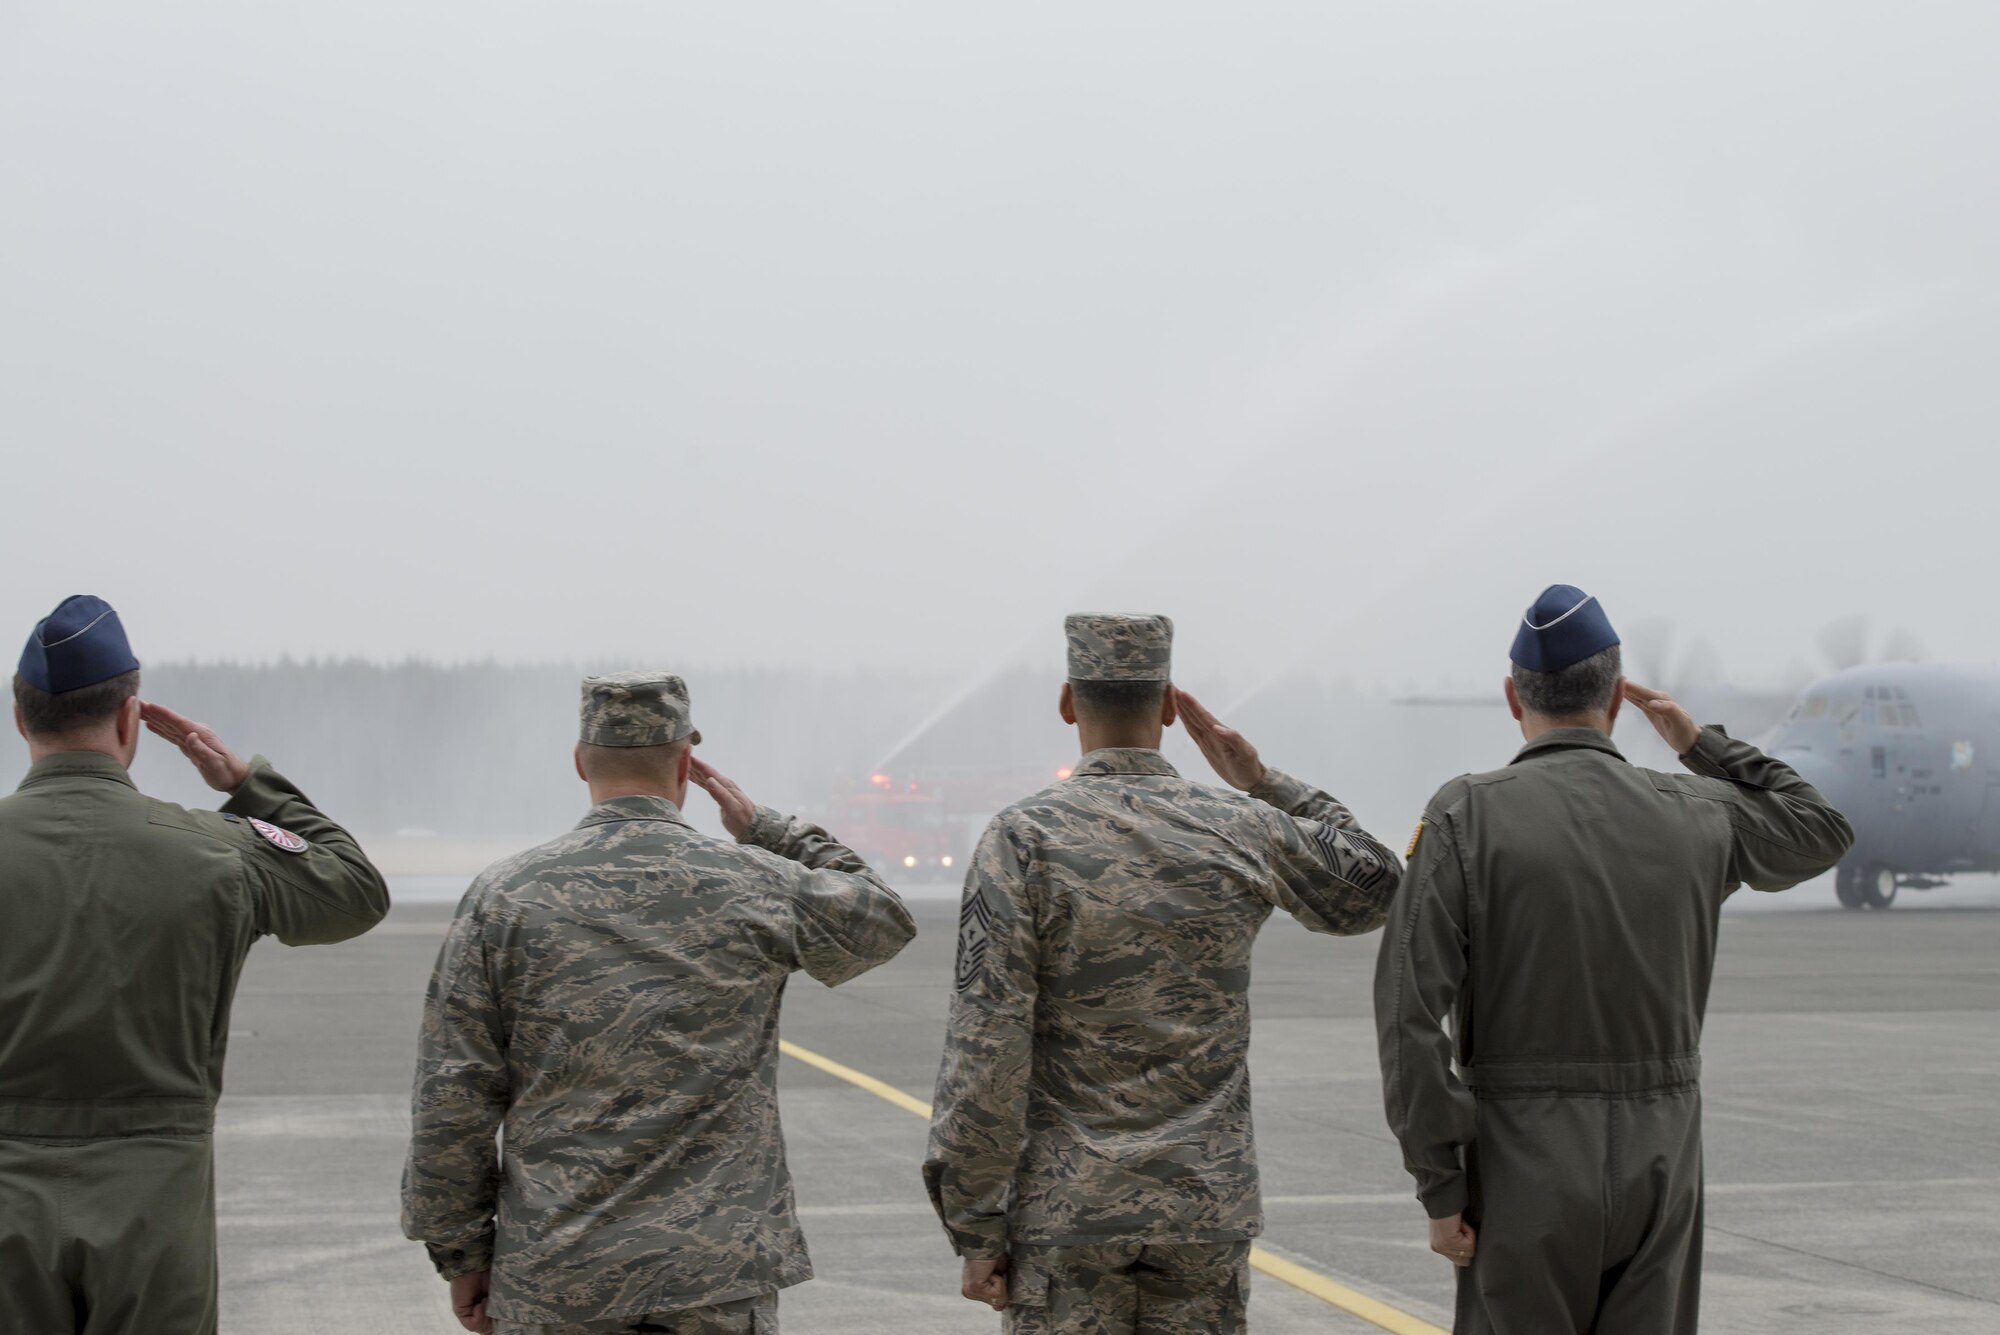 Base leadership salute the first C-130J Super Hercules to be assigned to U.S. Pacific Air Forces at Yokota Air Base, Japan, Mar. 6, 2017. The C-130Js will be used to support critical peacekeeping and contingency operations throughout the Indo-Asia Pacific region, including cargo delivery, troop transport, airdrop and aeromedical missions. (U.S. Air Force photo by Senior Airman David C. Danford)